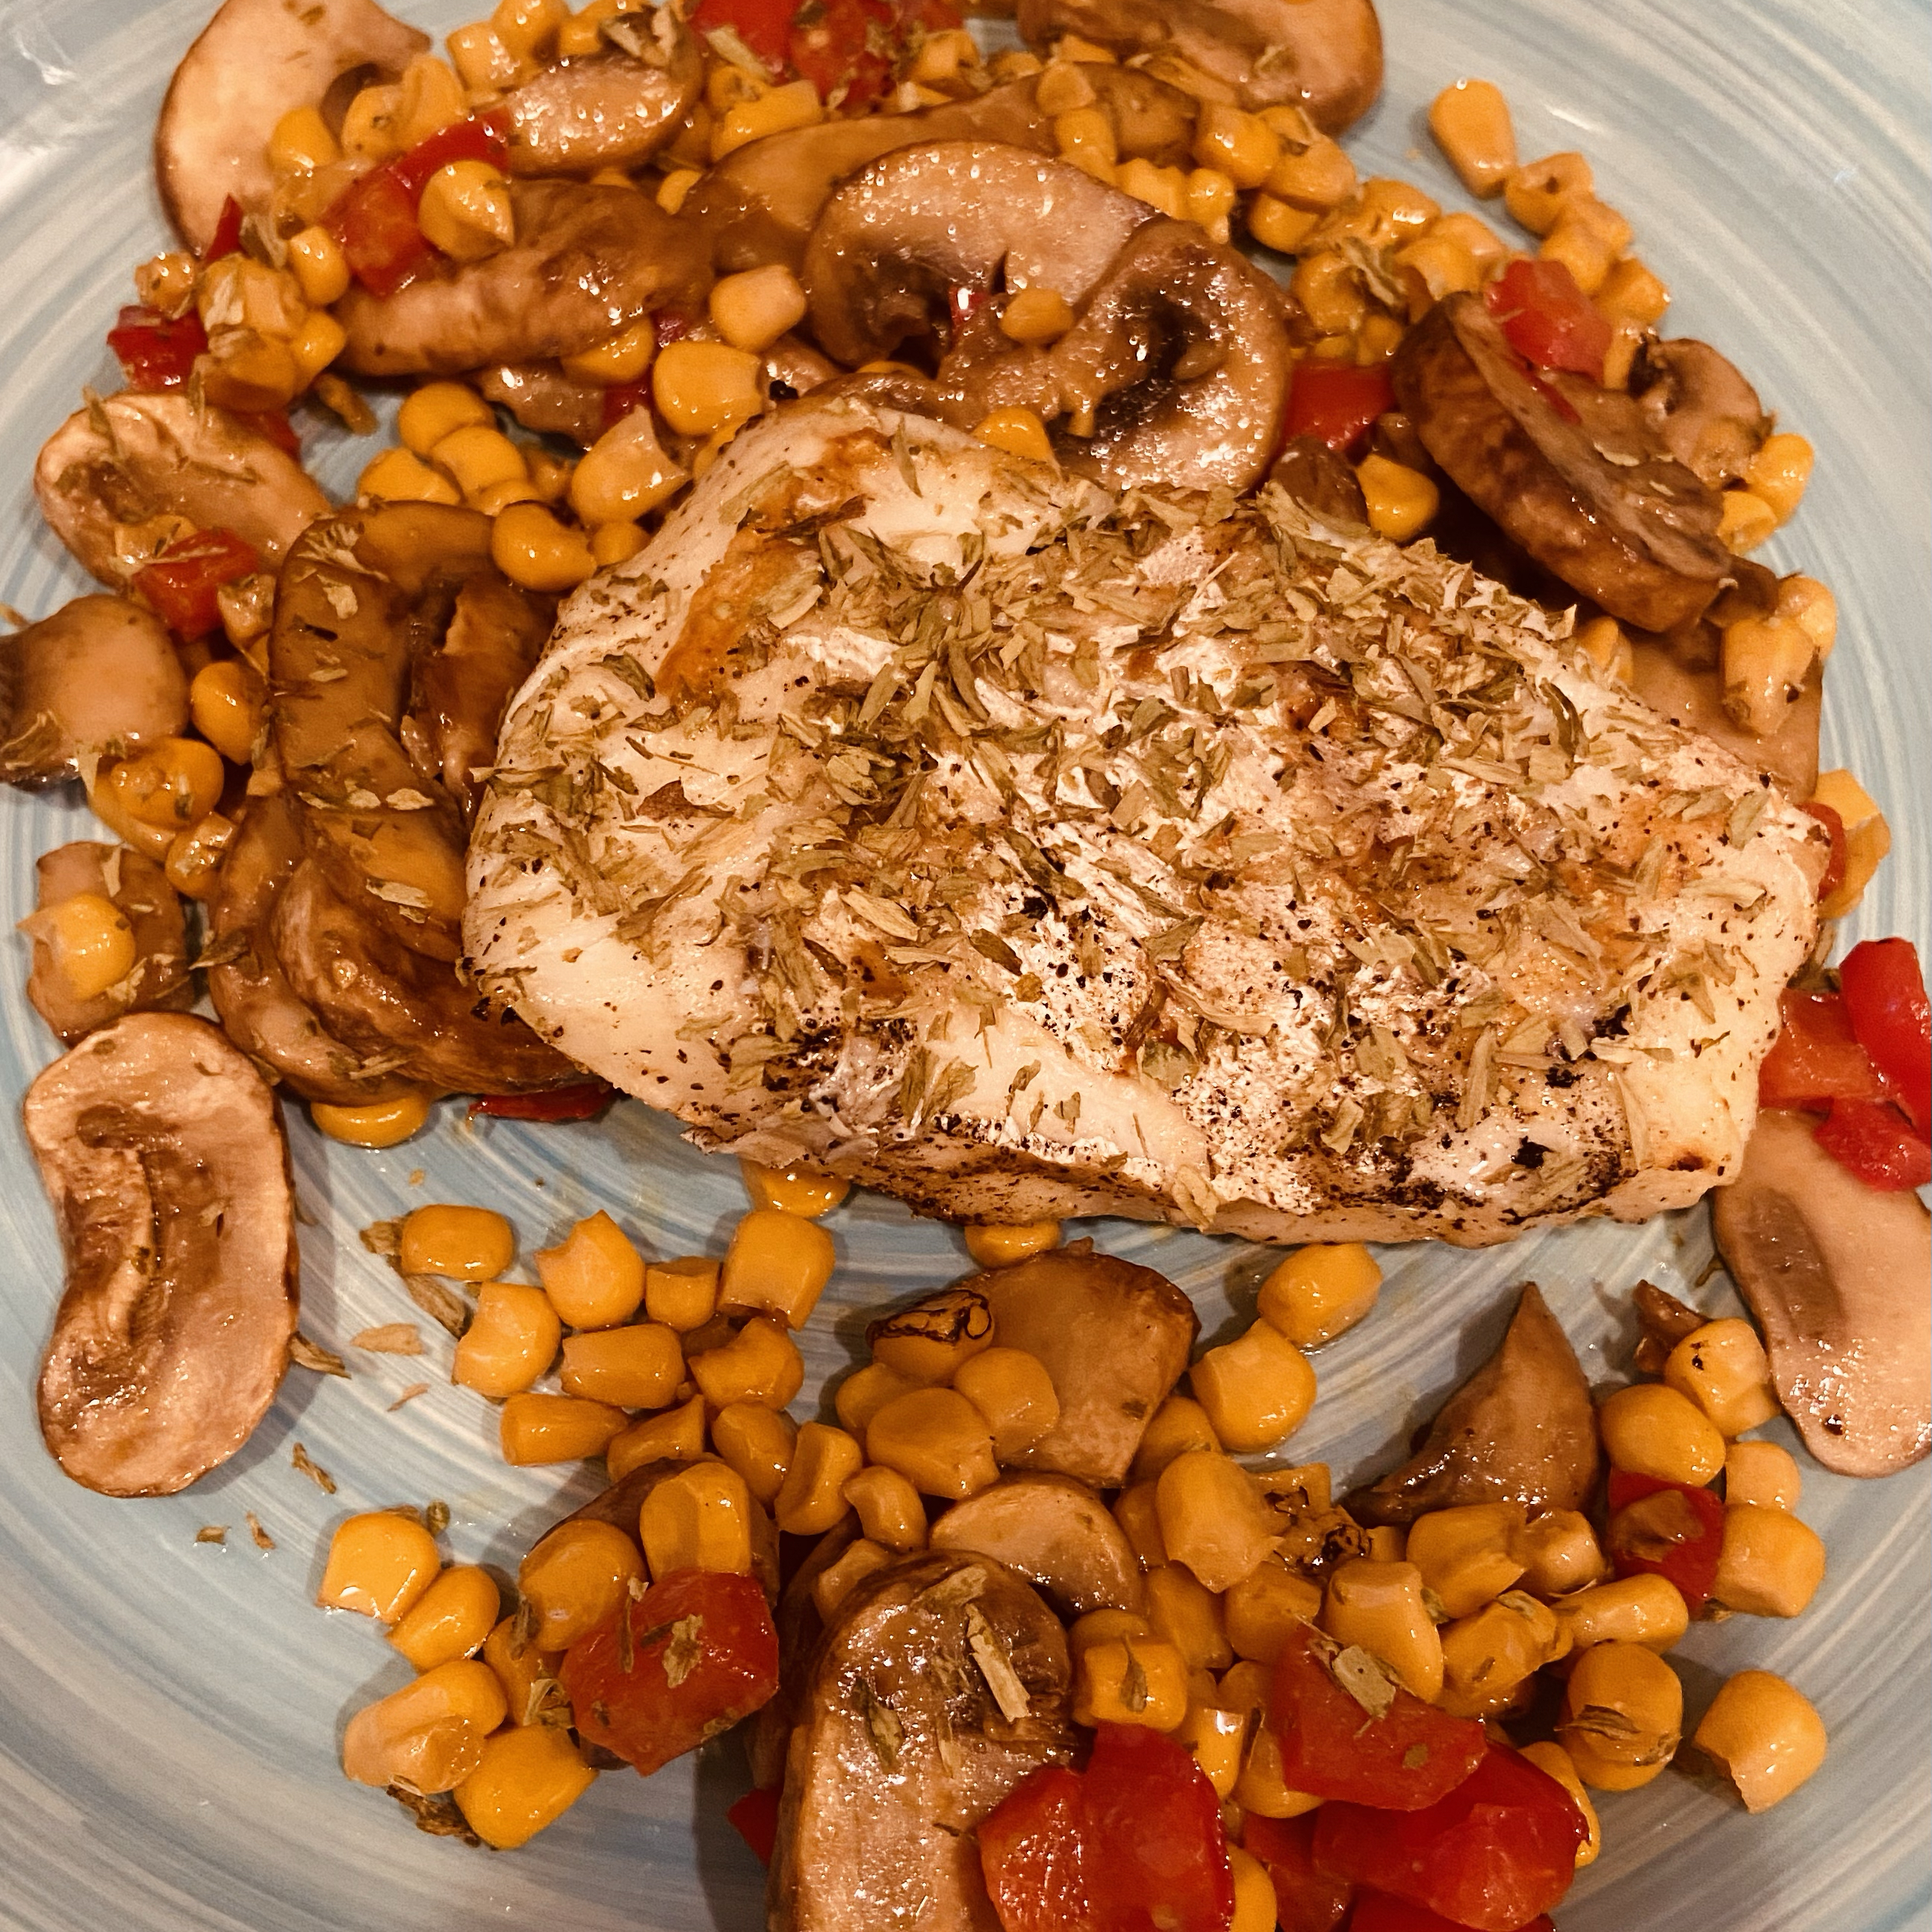 Grilled Halibut Steaks with Corn and Chanterelles tinsdale